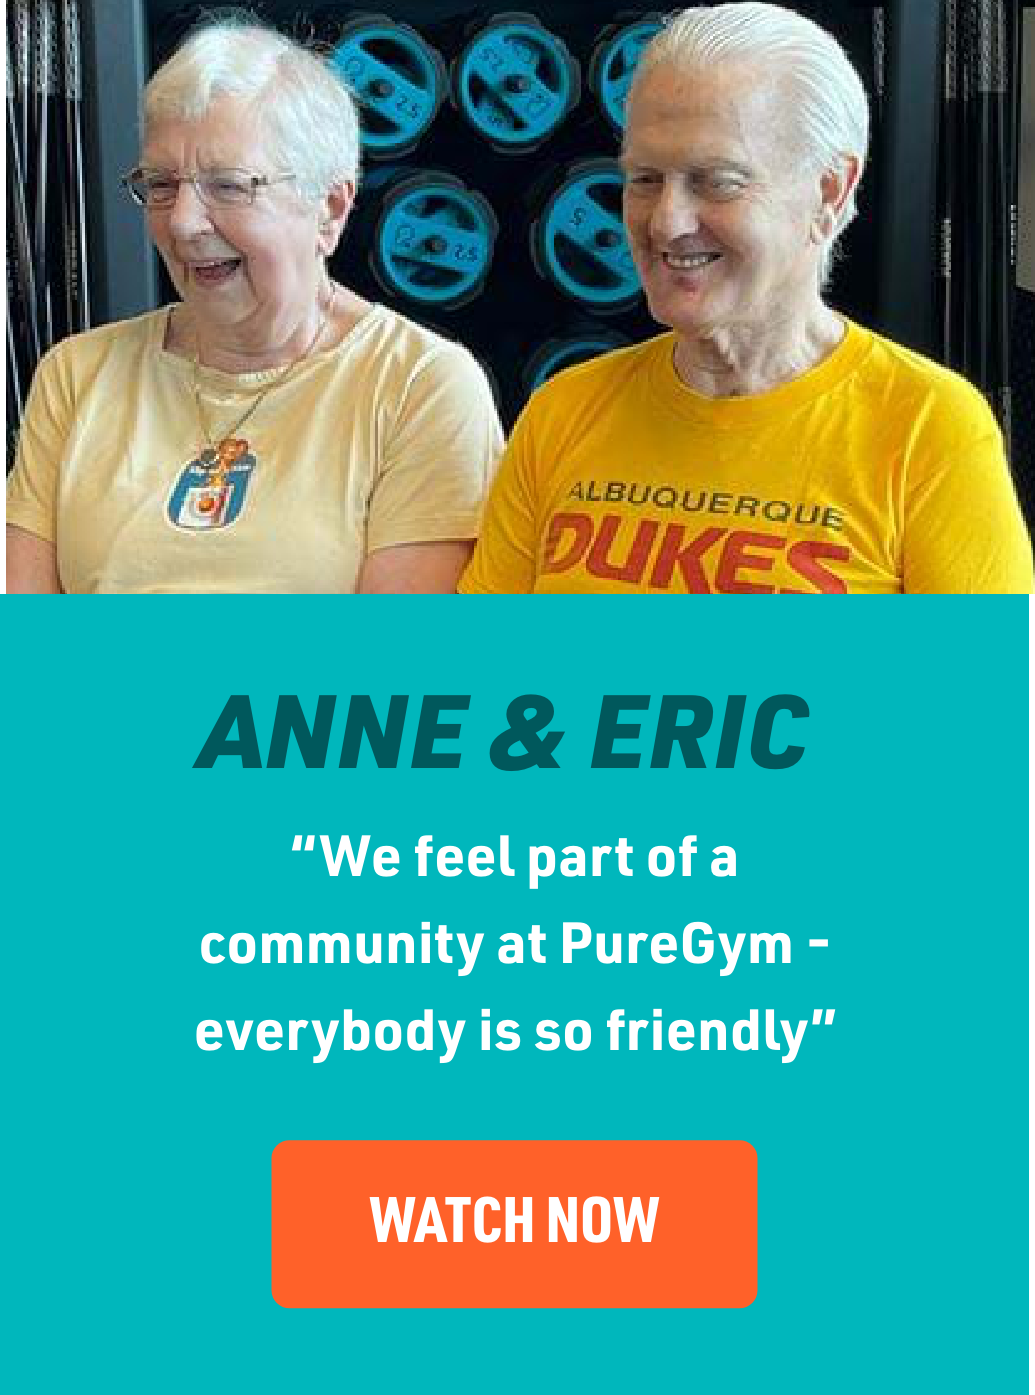 Anne and Eric's story